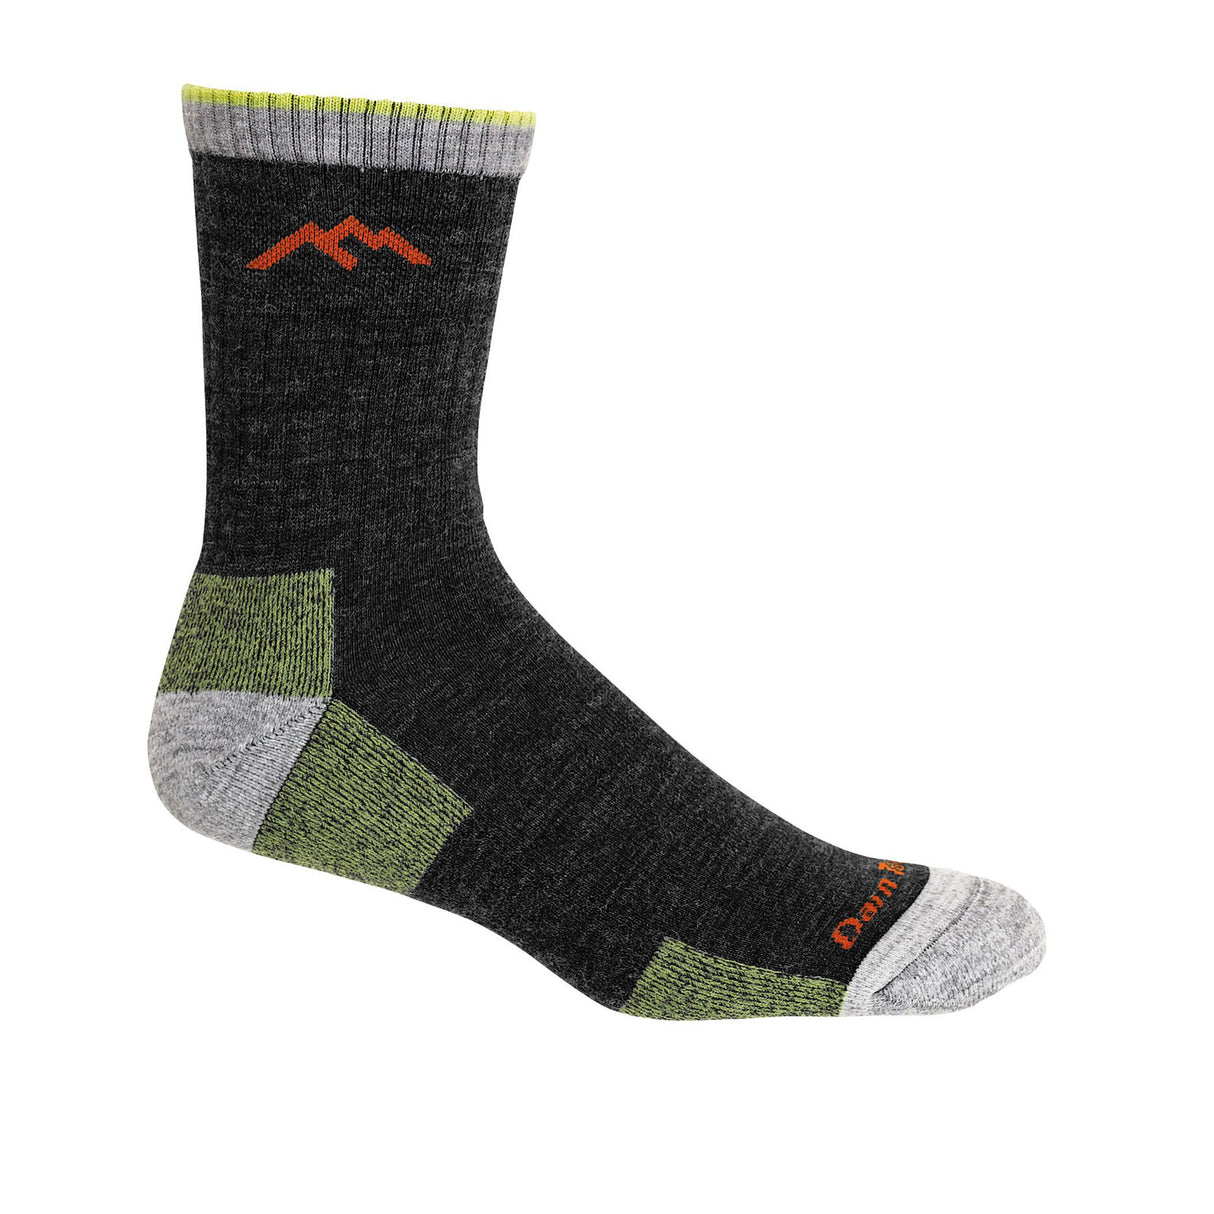 Darn Tough Hiker Midweight Micro Crew Sock with Cushion (Men) - Lime Accessories - Socks - Performance - The Heel Shoe Fitters